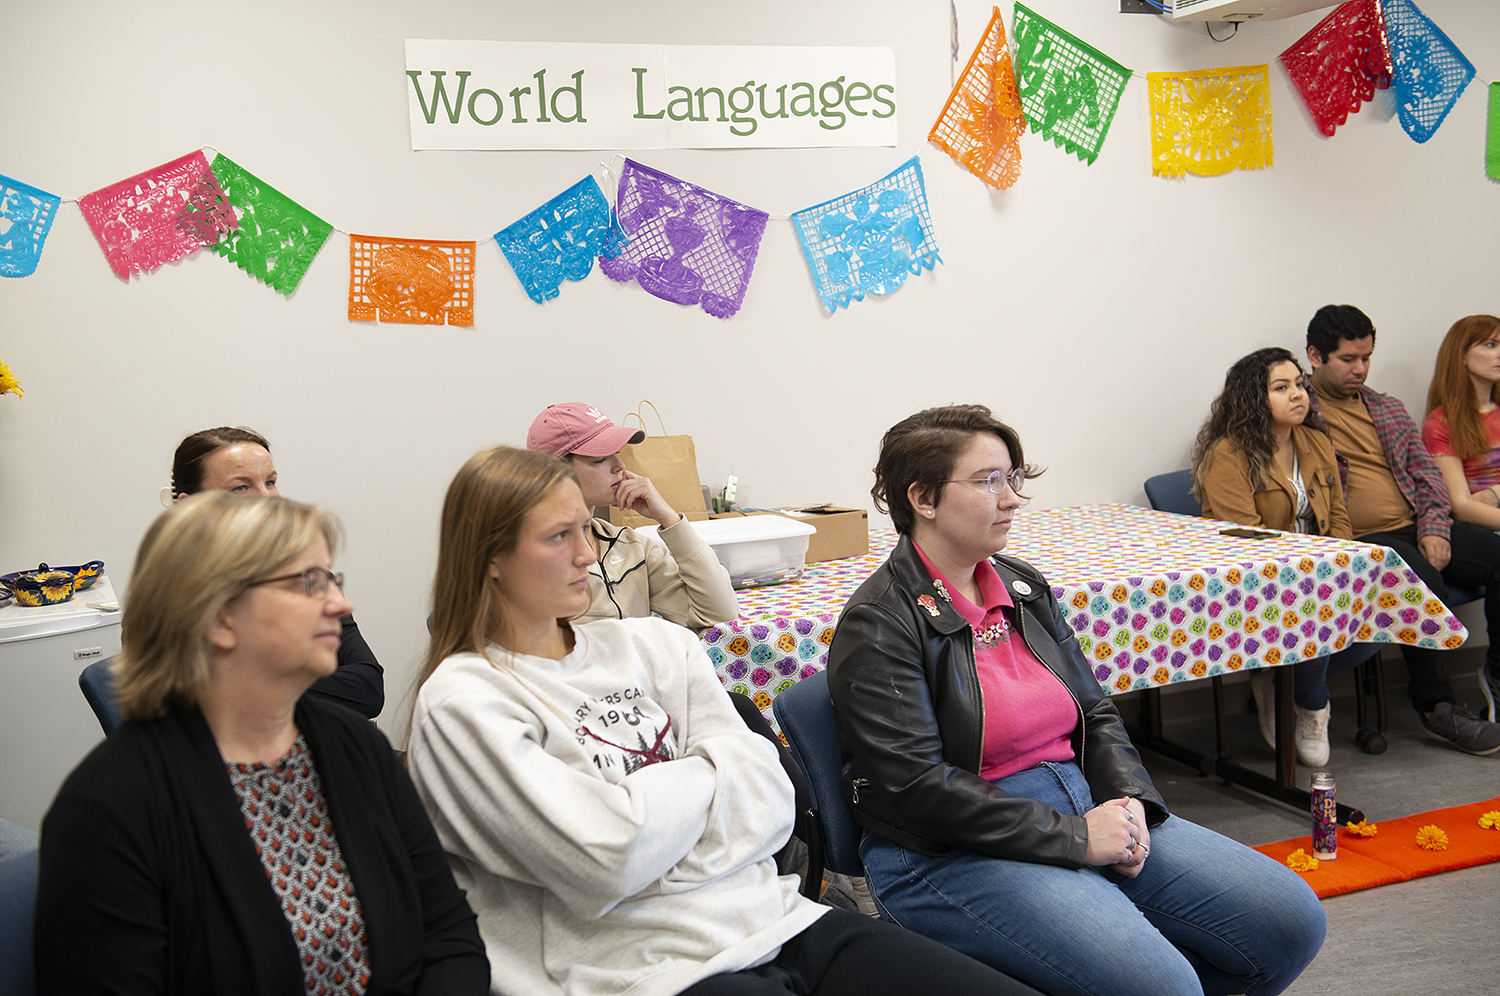 Day of the Dead celebrations and students sitting under a world languages banner